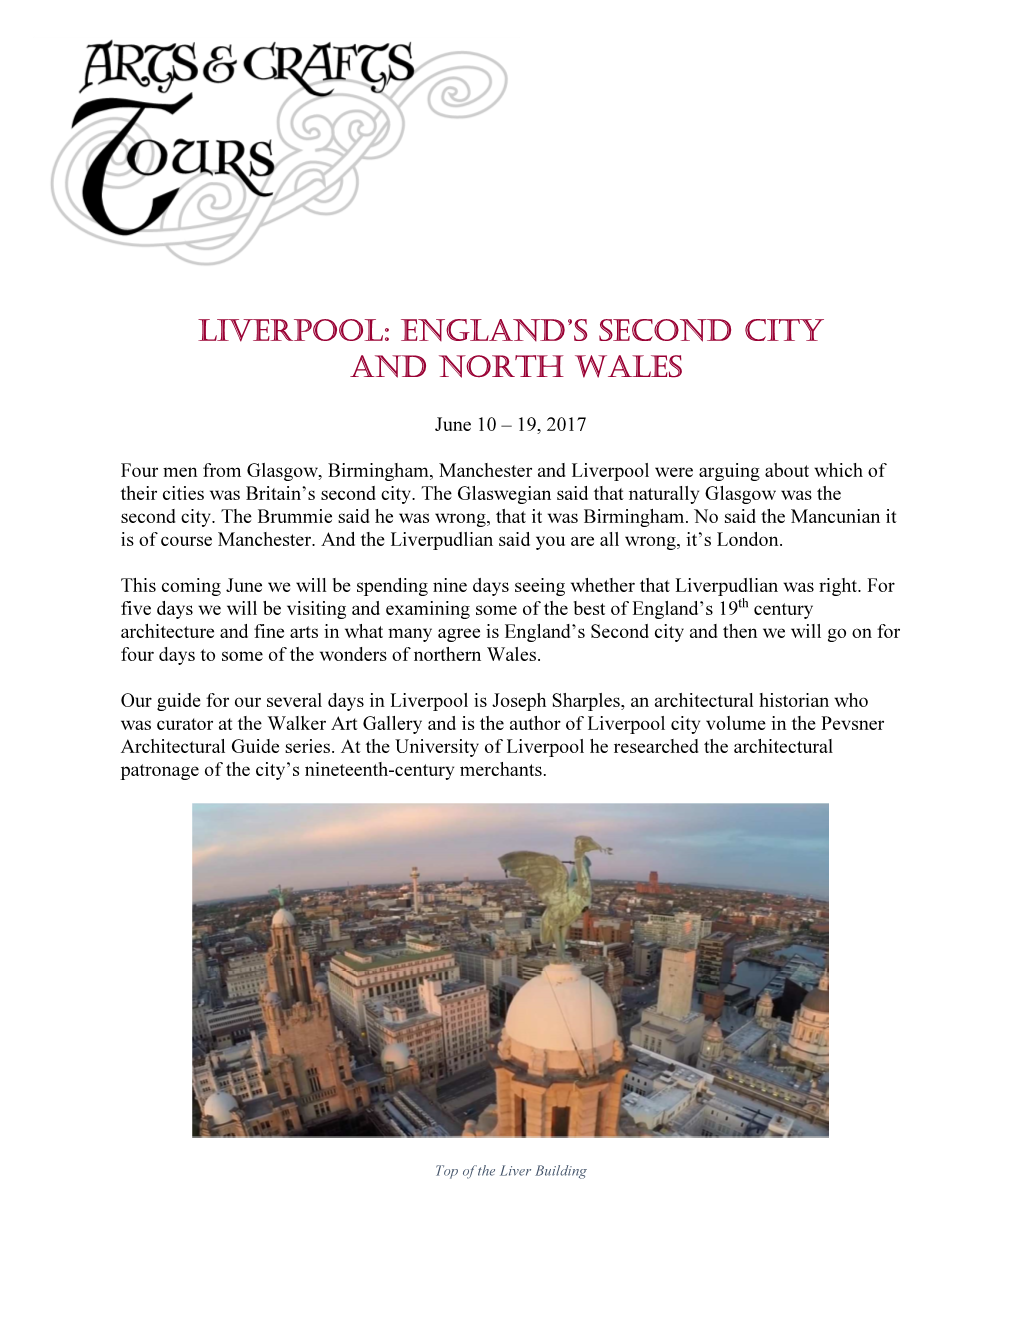 Liverpool: England's Second City and North Wales